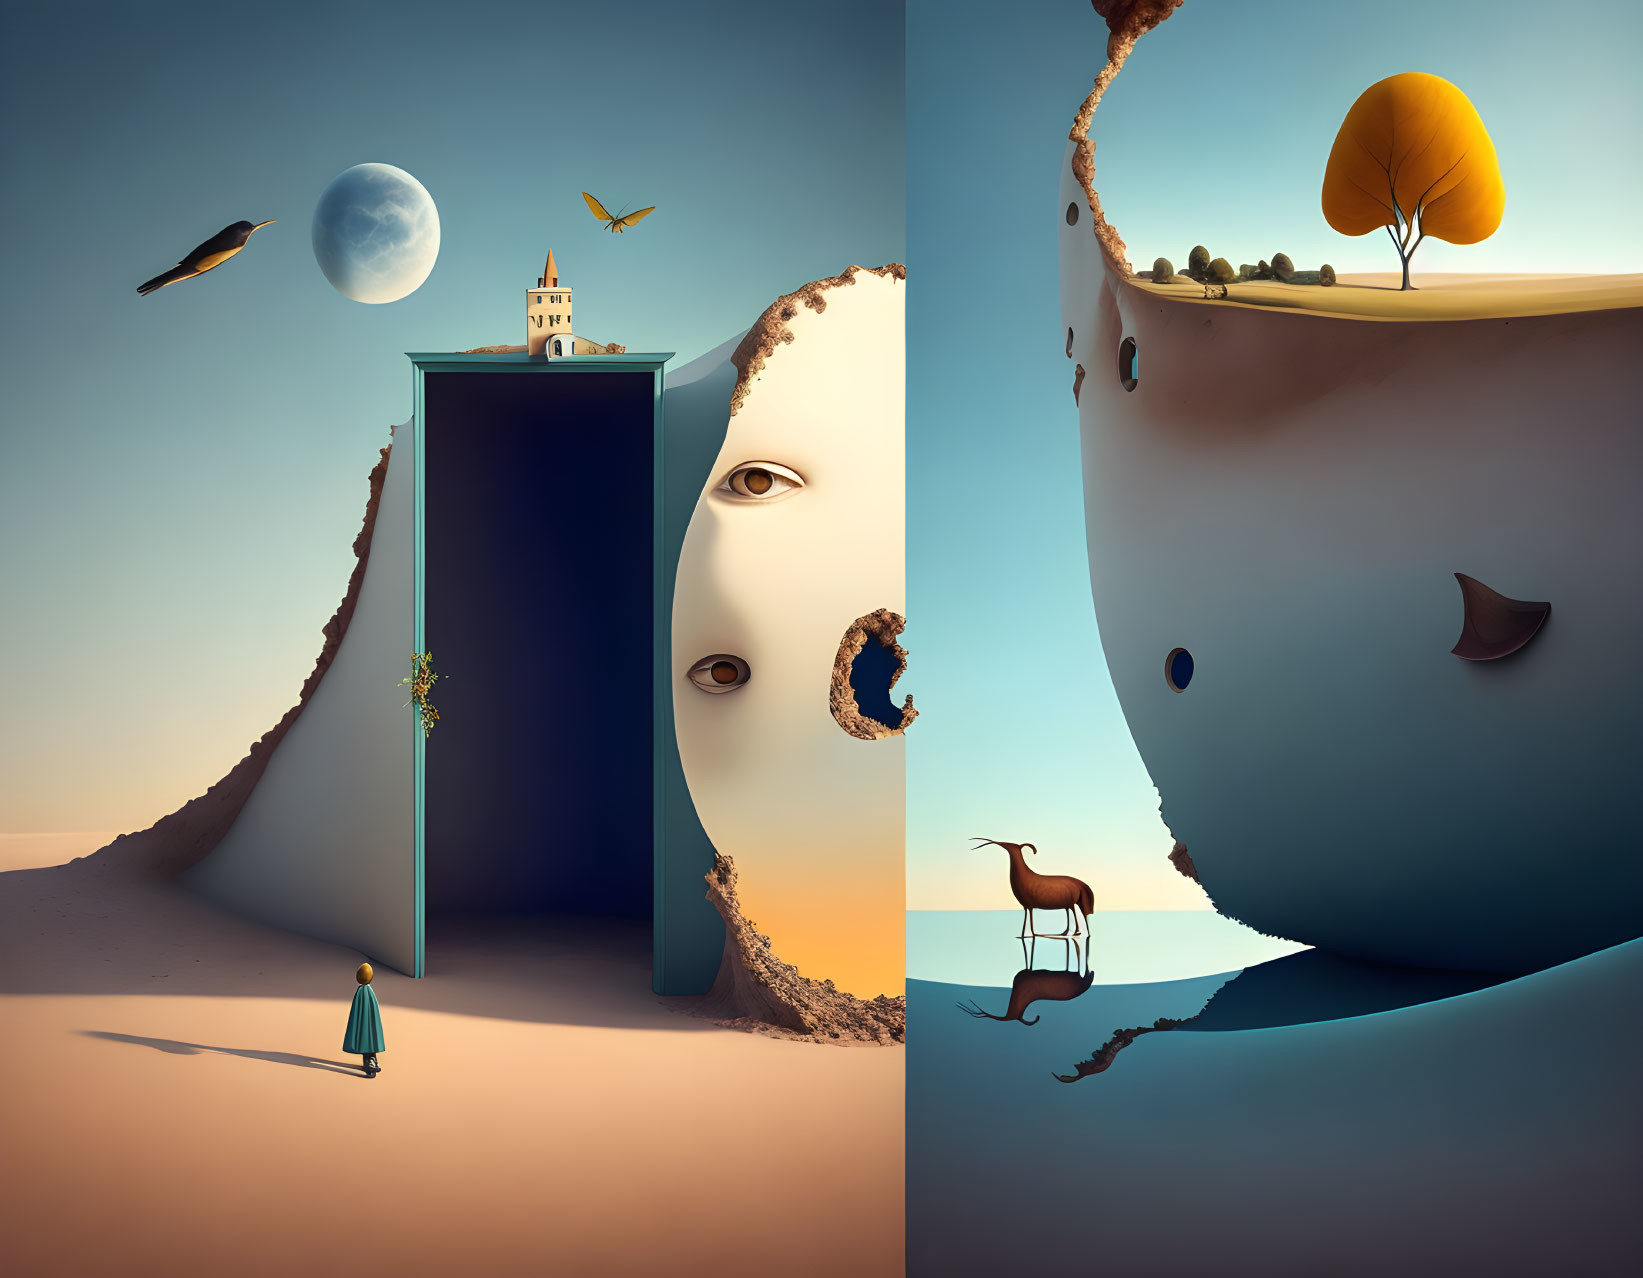 Split Moonscapes with Doors, Man, Birds, Trees, Deer, and Ethereal Lighting